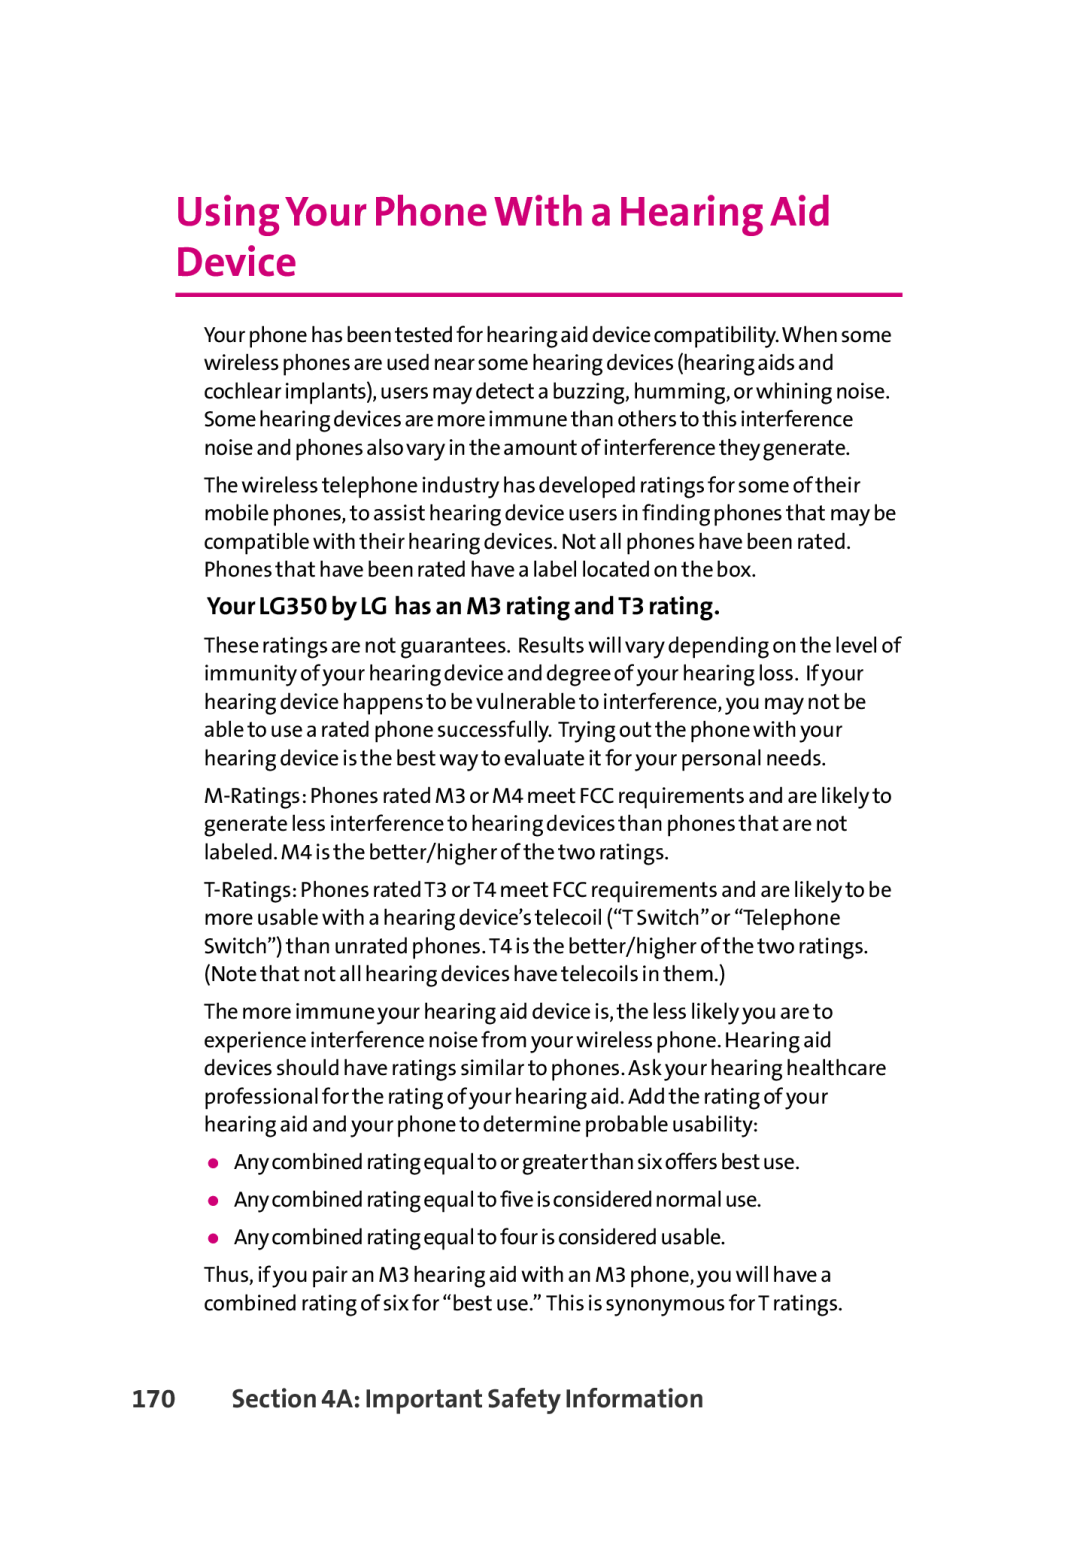 LG Electronics manual Using Your Phone With a Hearing Aid Device, Your LG350 by LG has an M3 rating and T3 rating 